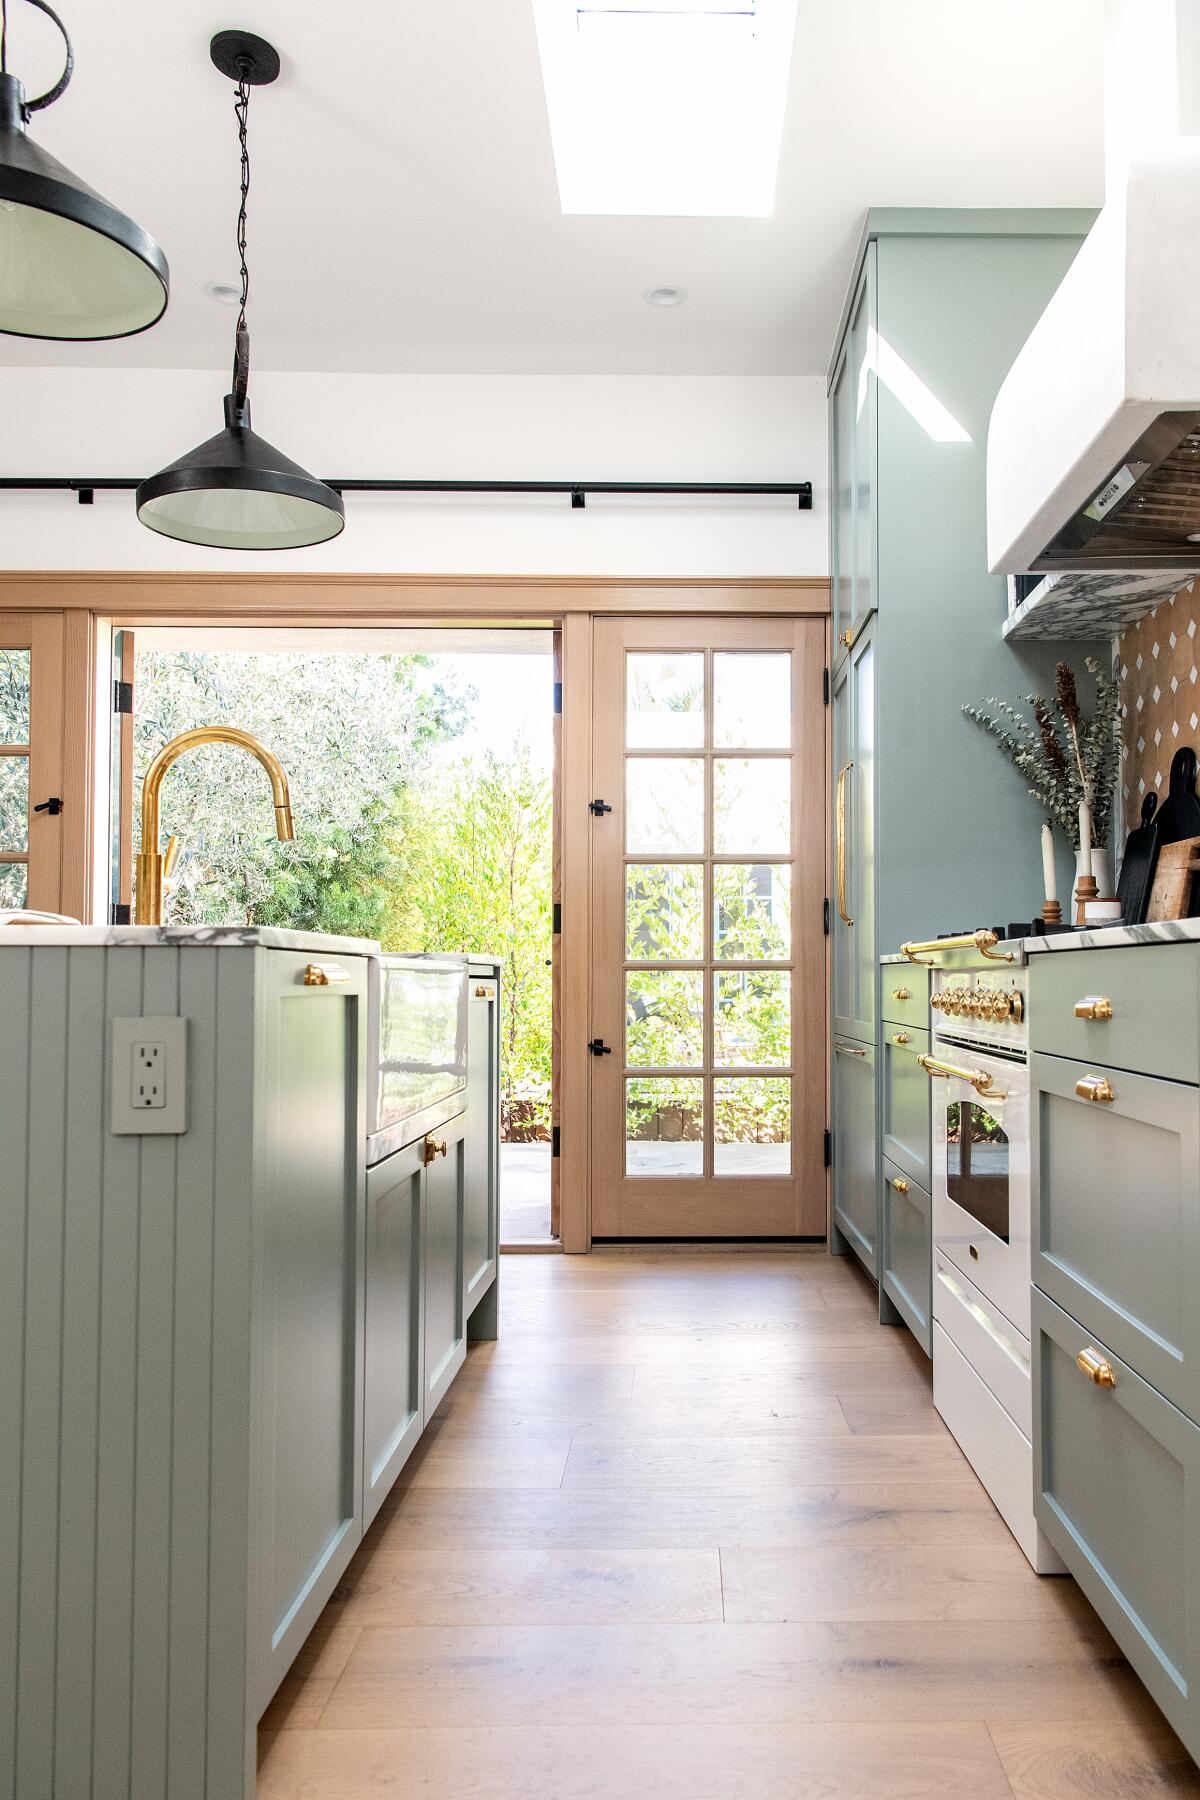 Looking through a kitchen with green-gray cabinets, gold hardware and a white oven toward an ADU's backyard.